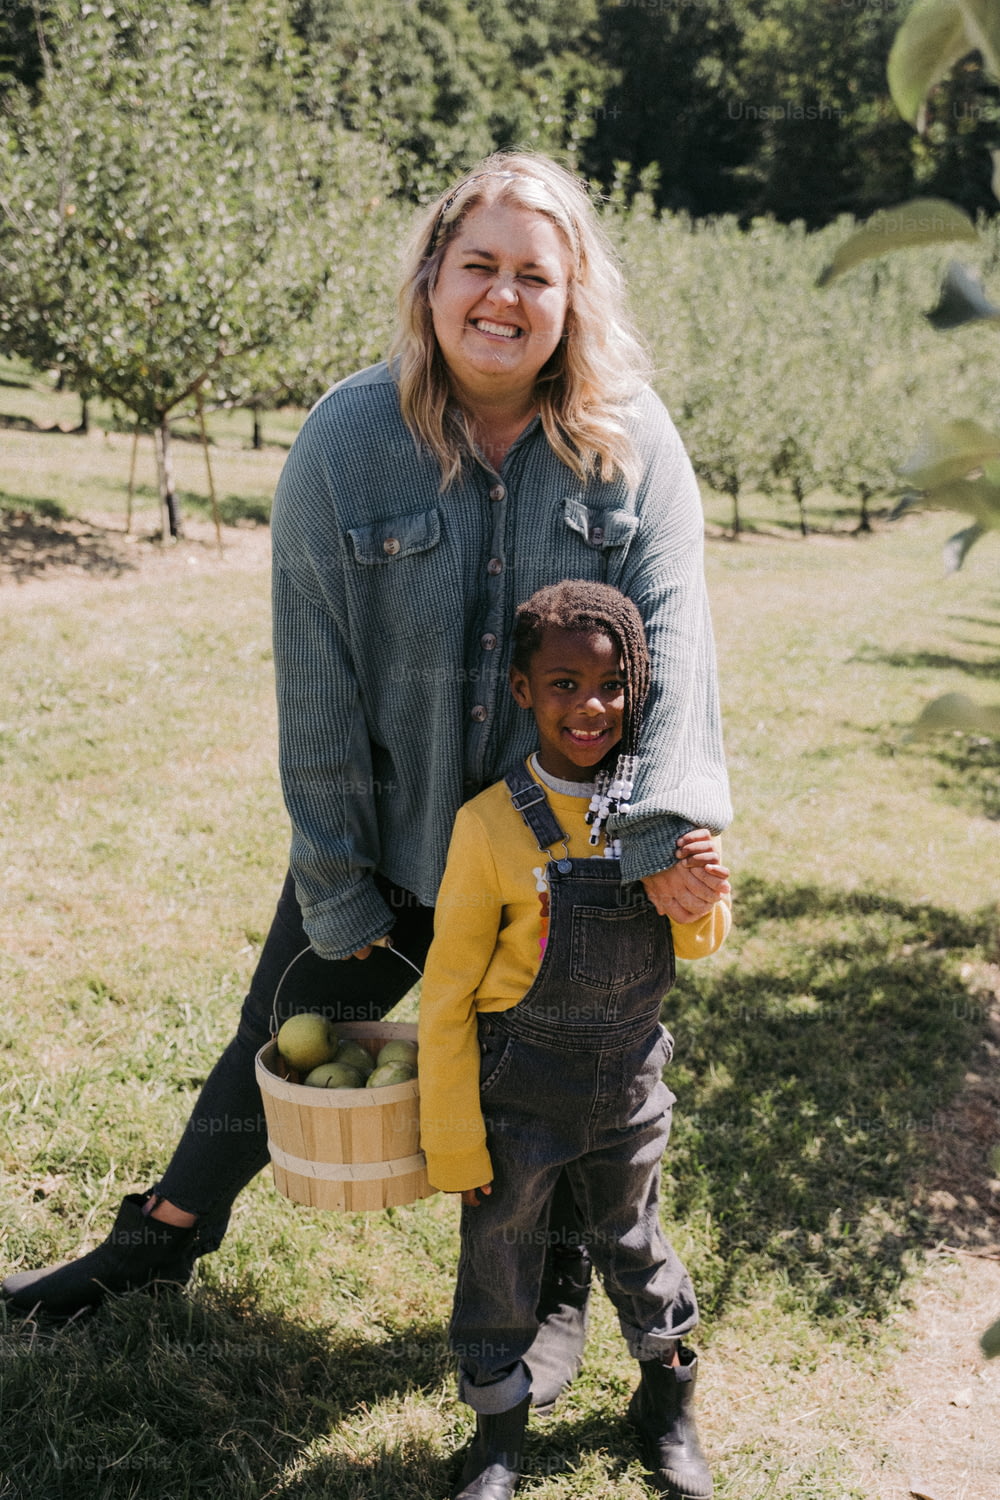 a woman holding a basket of apples next to a child